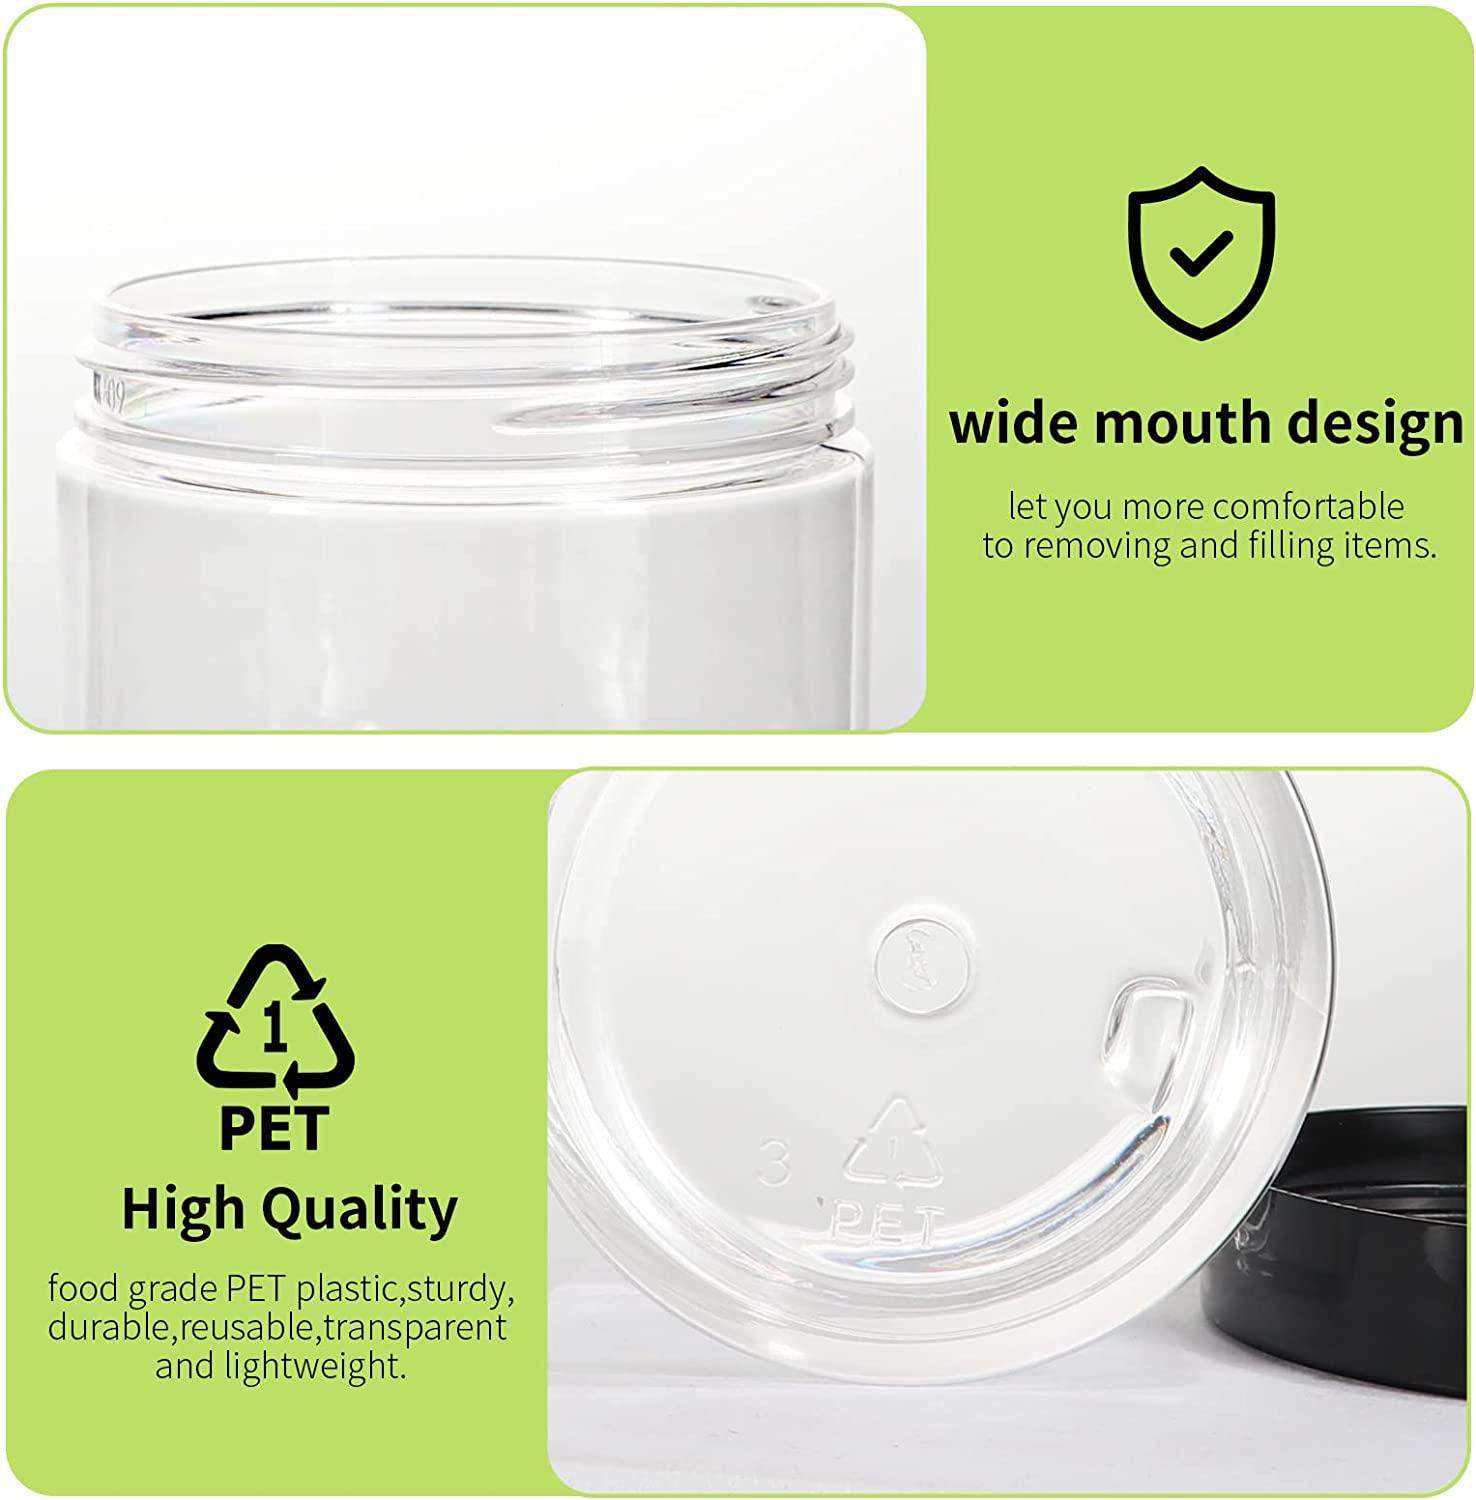 Slime Containers with Water-tight Lids (8 oz, 12 Pack) - Clear Plastic Food  Storage Jars with Individual Labels- Great for your slime kit - BPA Free 